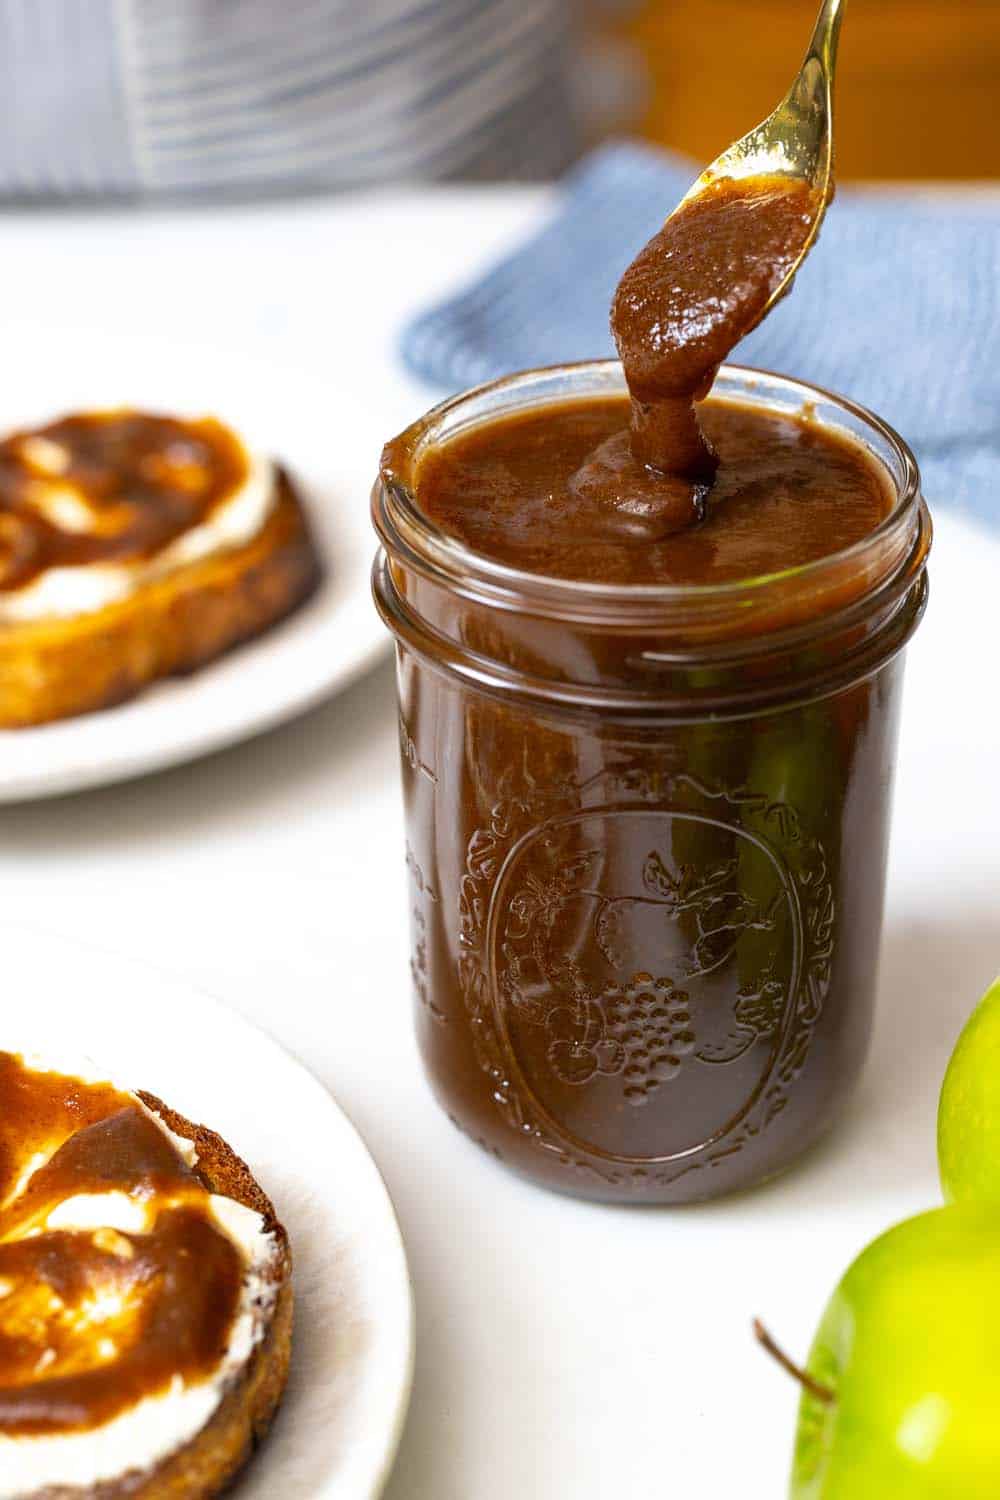 Apple butter in a jar being served on toast